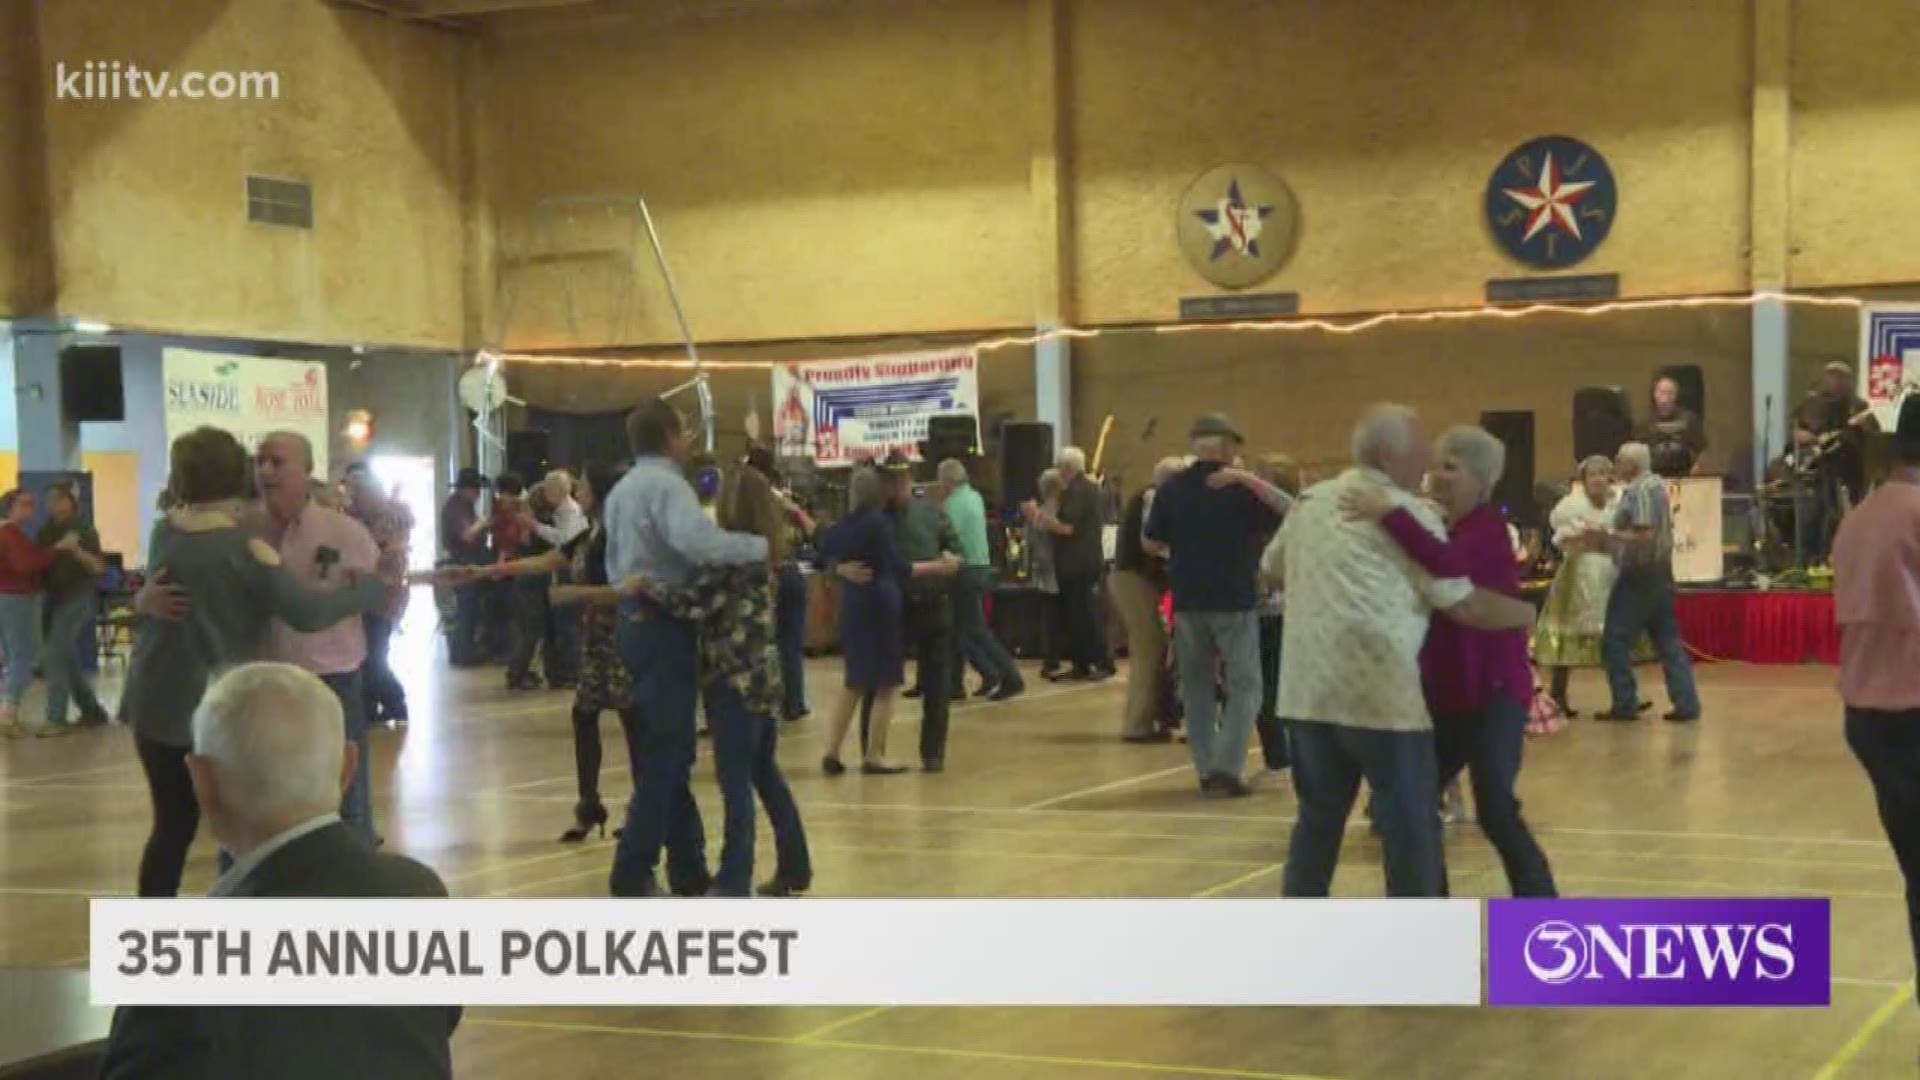 If you didn't get to take part in the fun yesterday, then make sure to mark your calendar for the Summer Polkafest that will be August 8th over at Moravian Hall.